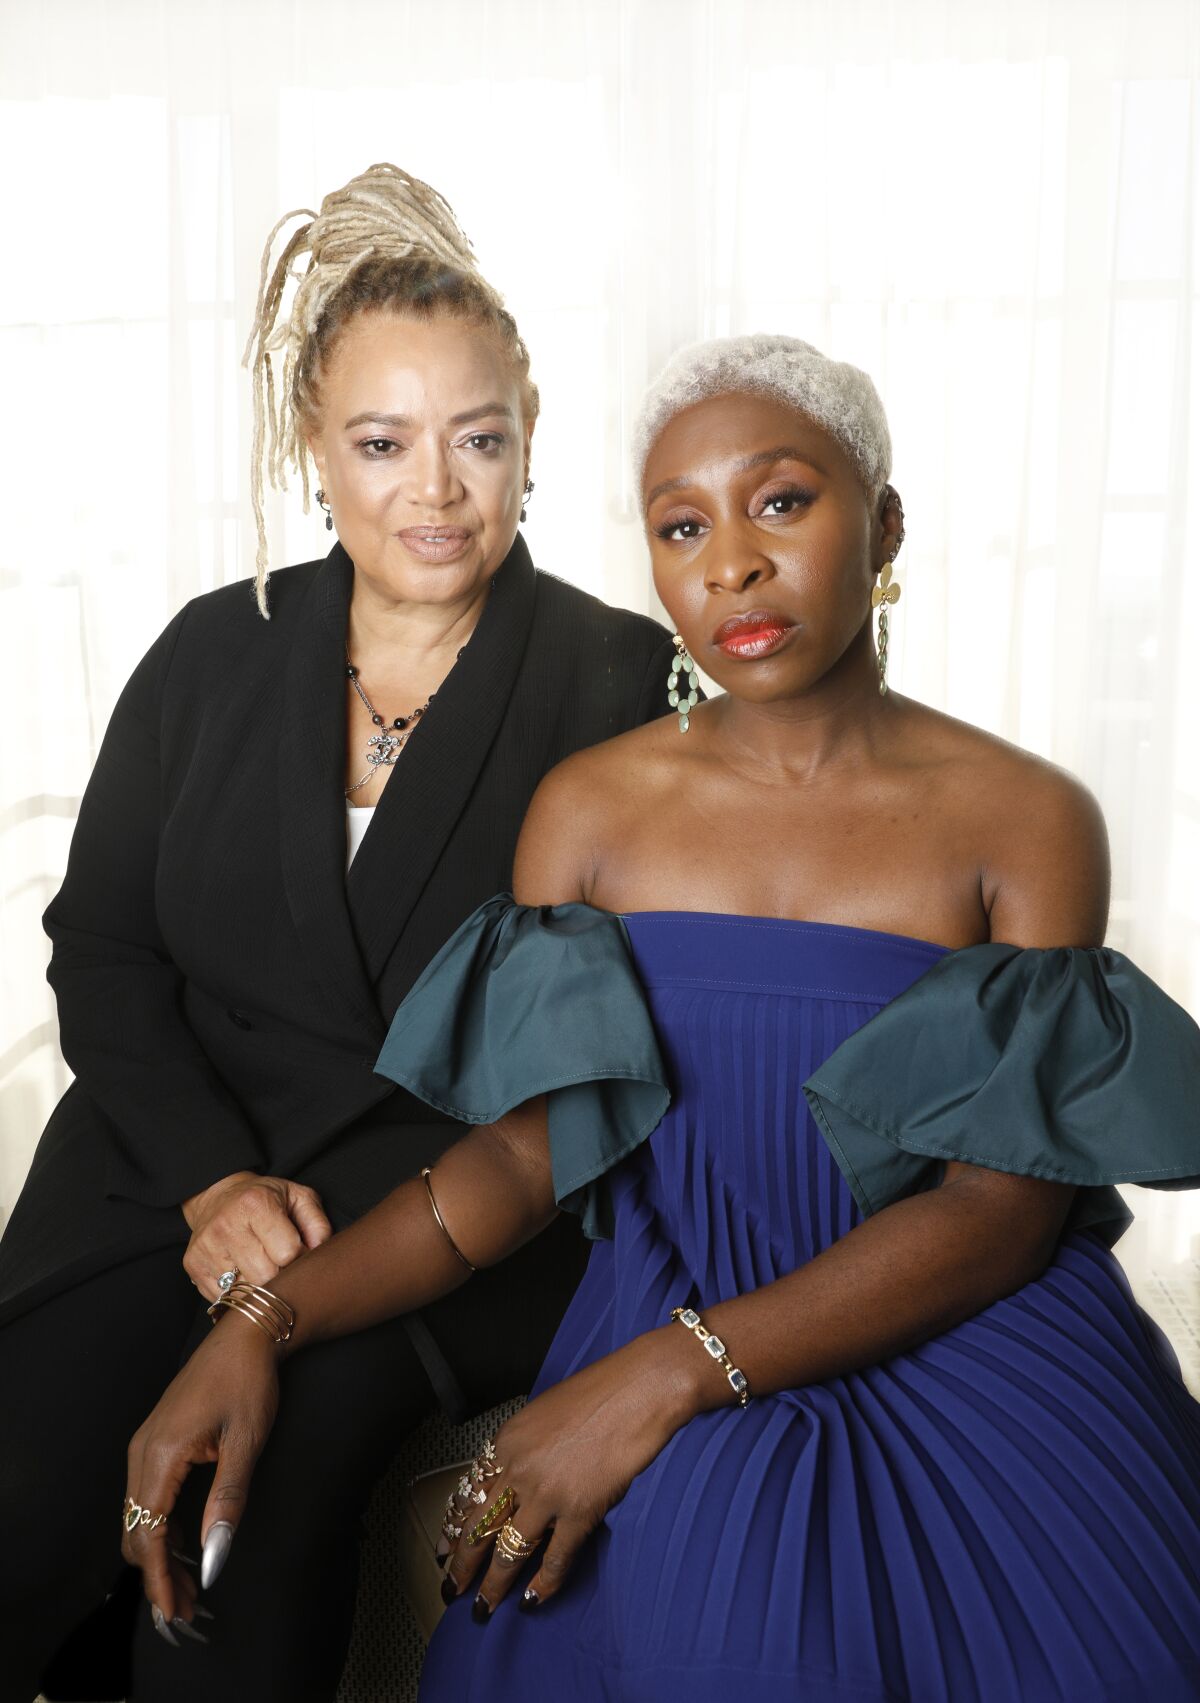 Director Kasi Lemmons (left) and star Cynthia Erivo of the movie "Harriet," a biopic about Harriet Tubman from Focus Features. The two were photographed in Los Angeles on Sept. 12, 2019.